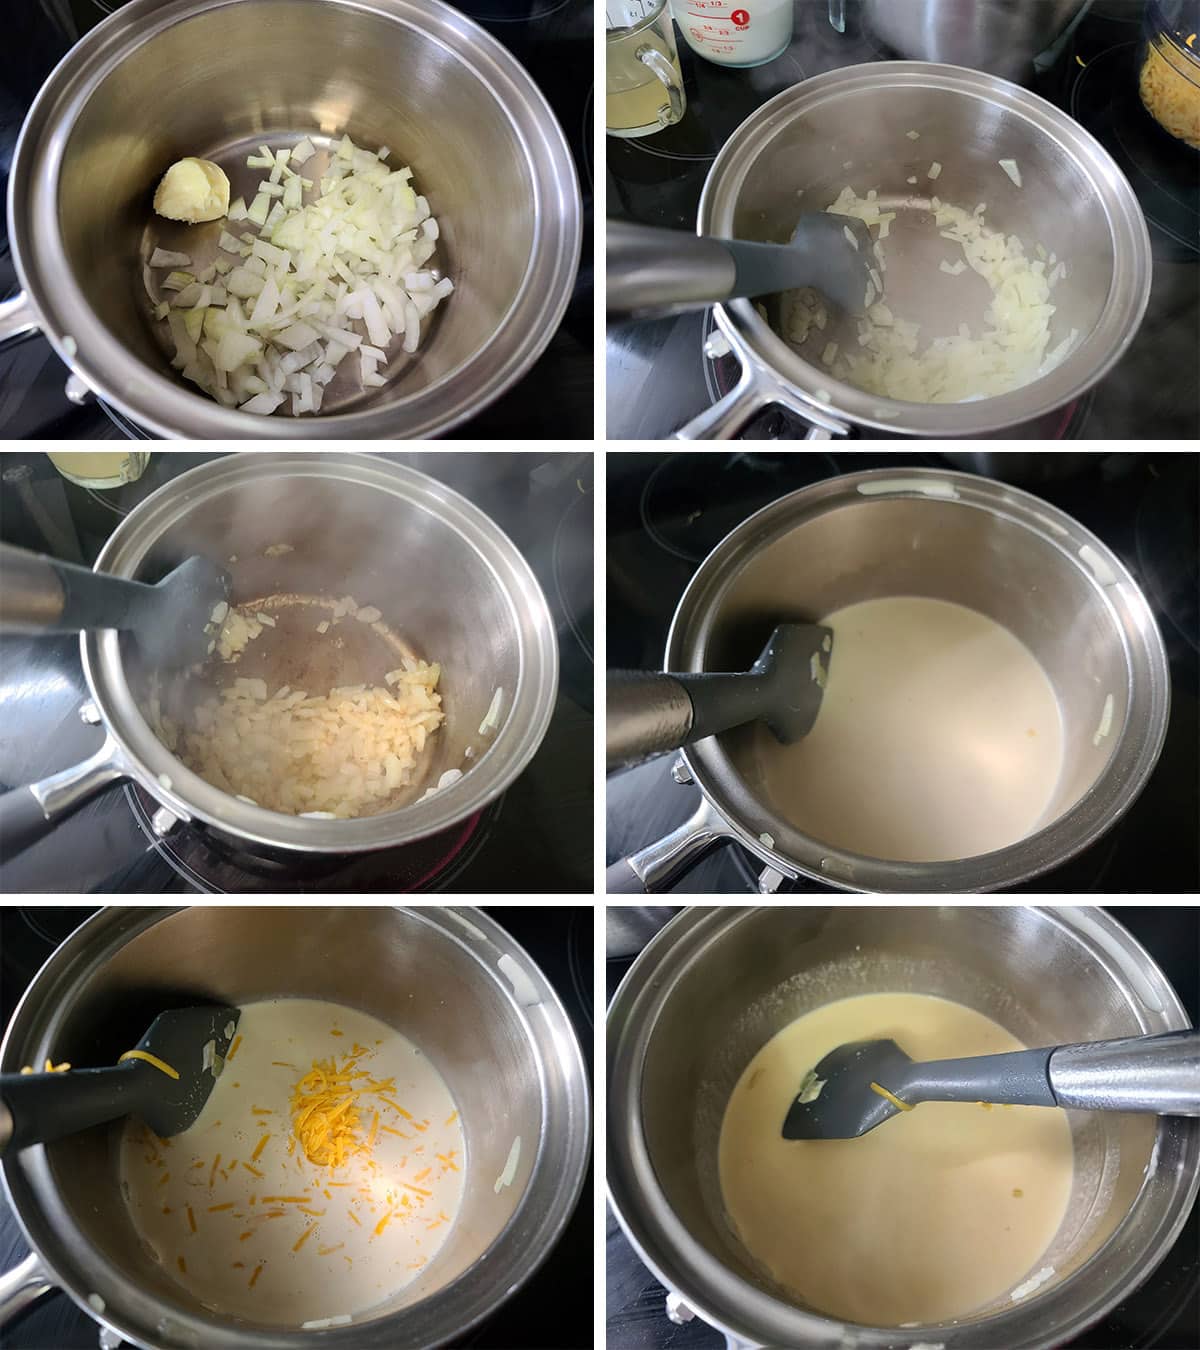 A 6 part image showing the cheese sauce being made.